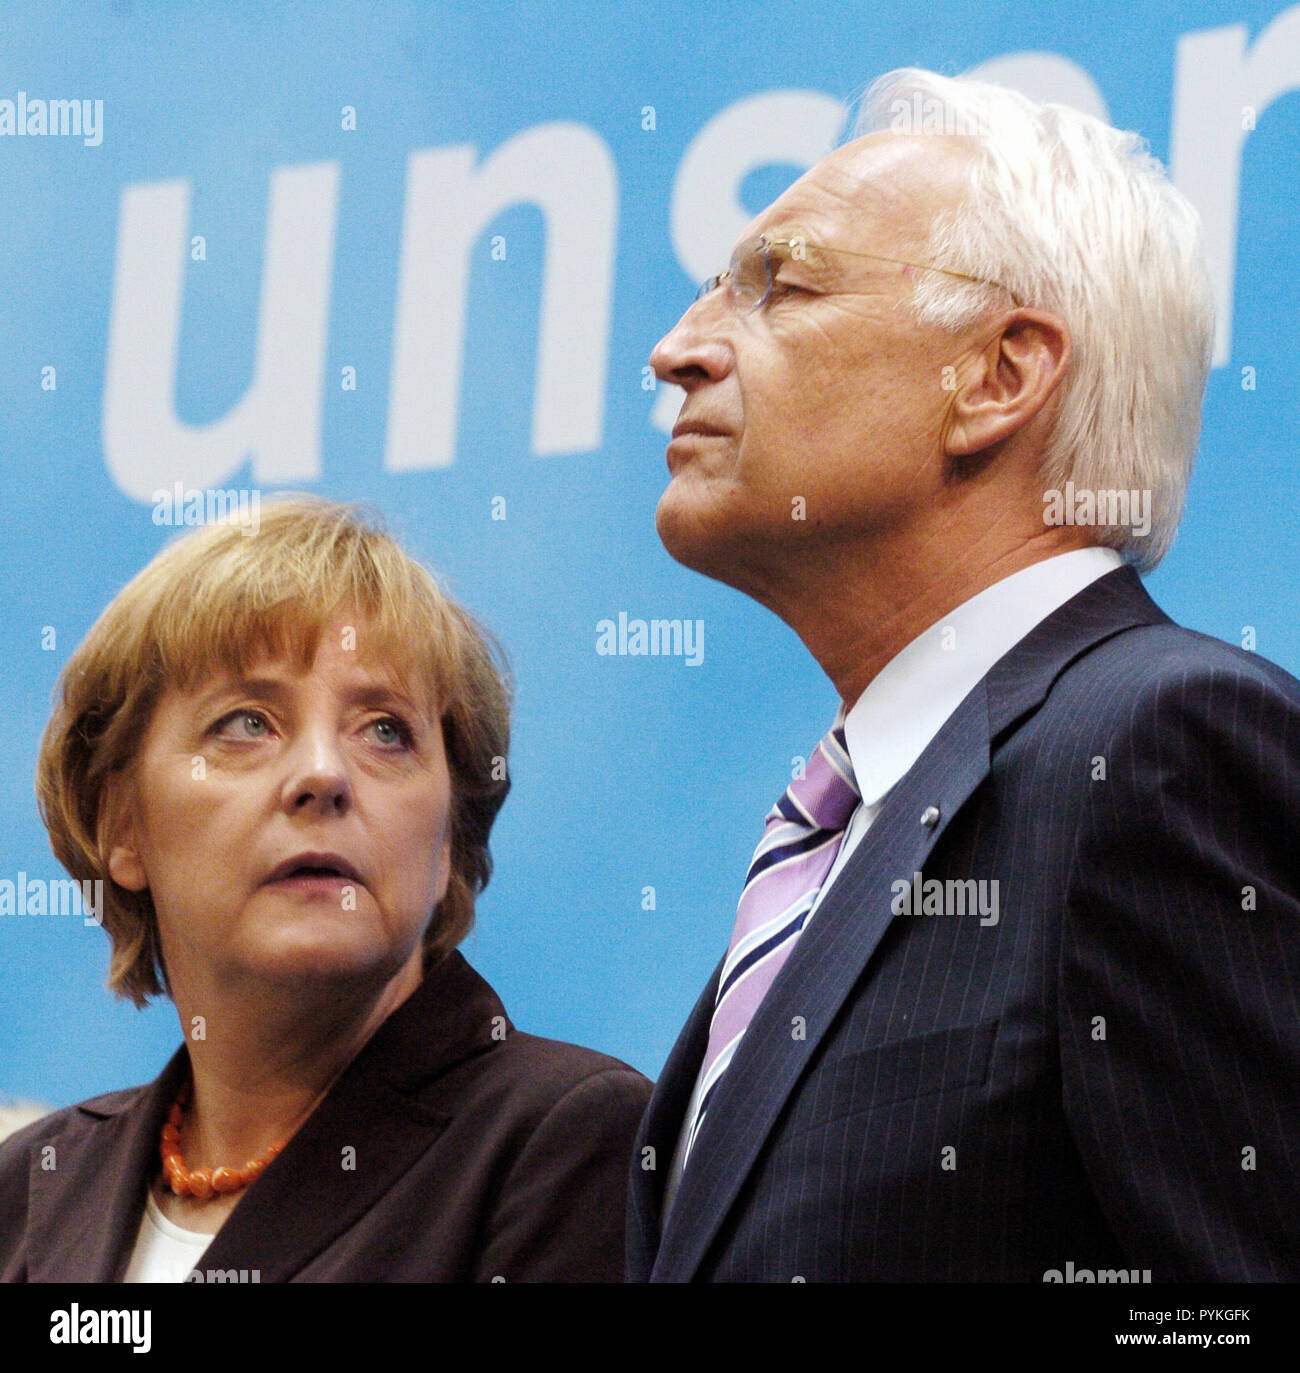 Berlin, Wednesday. 17th Aug, 2005. (dpa) - Angela Merkel (L), chairwoman of the Christian Democratic Union (CDU) and candidate for the German chancellorship looks at chairman of the CSU Edmund Stoiber during a press conference in Berlin, Wednesday, 17 August 2005. The CDU introduced the members of the so-called 'competence team' for the German Bundestag election in September. | usage worldwide Credit: dpa/Alamy Live News Stock Photo